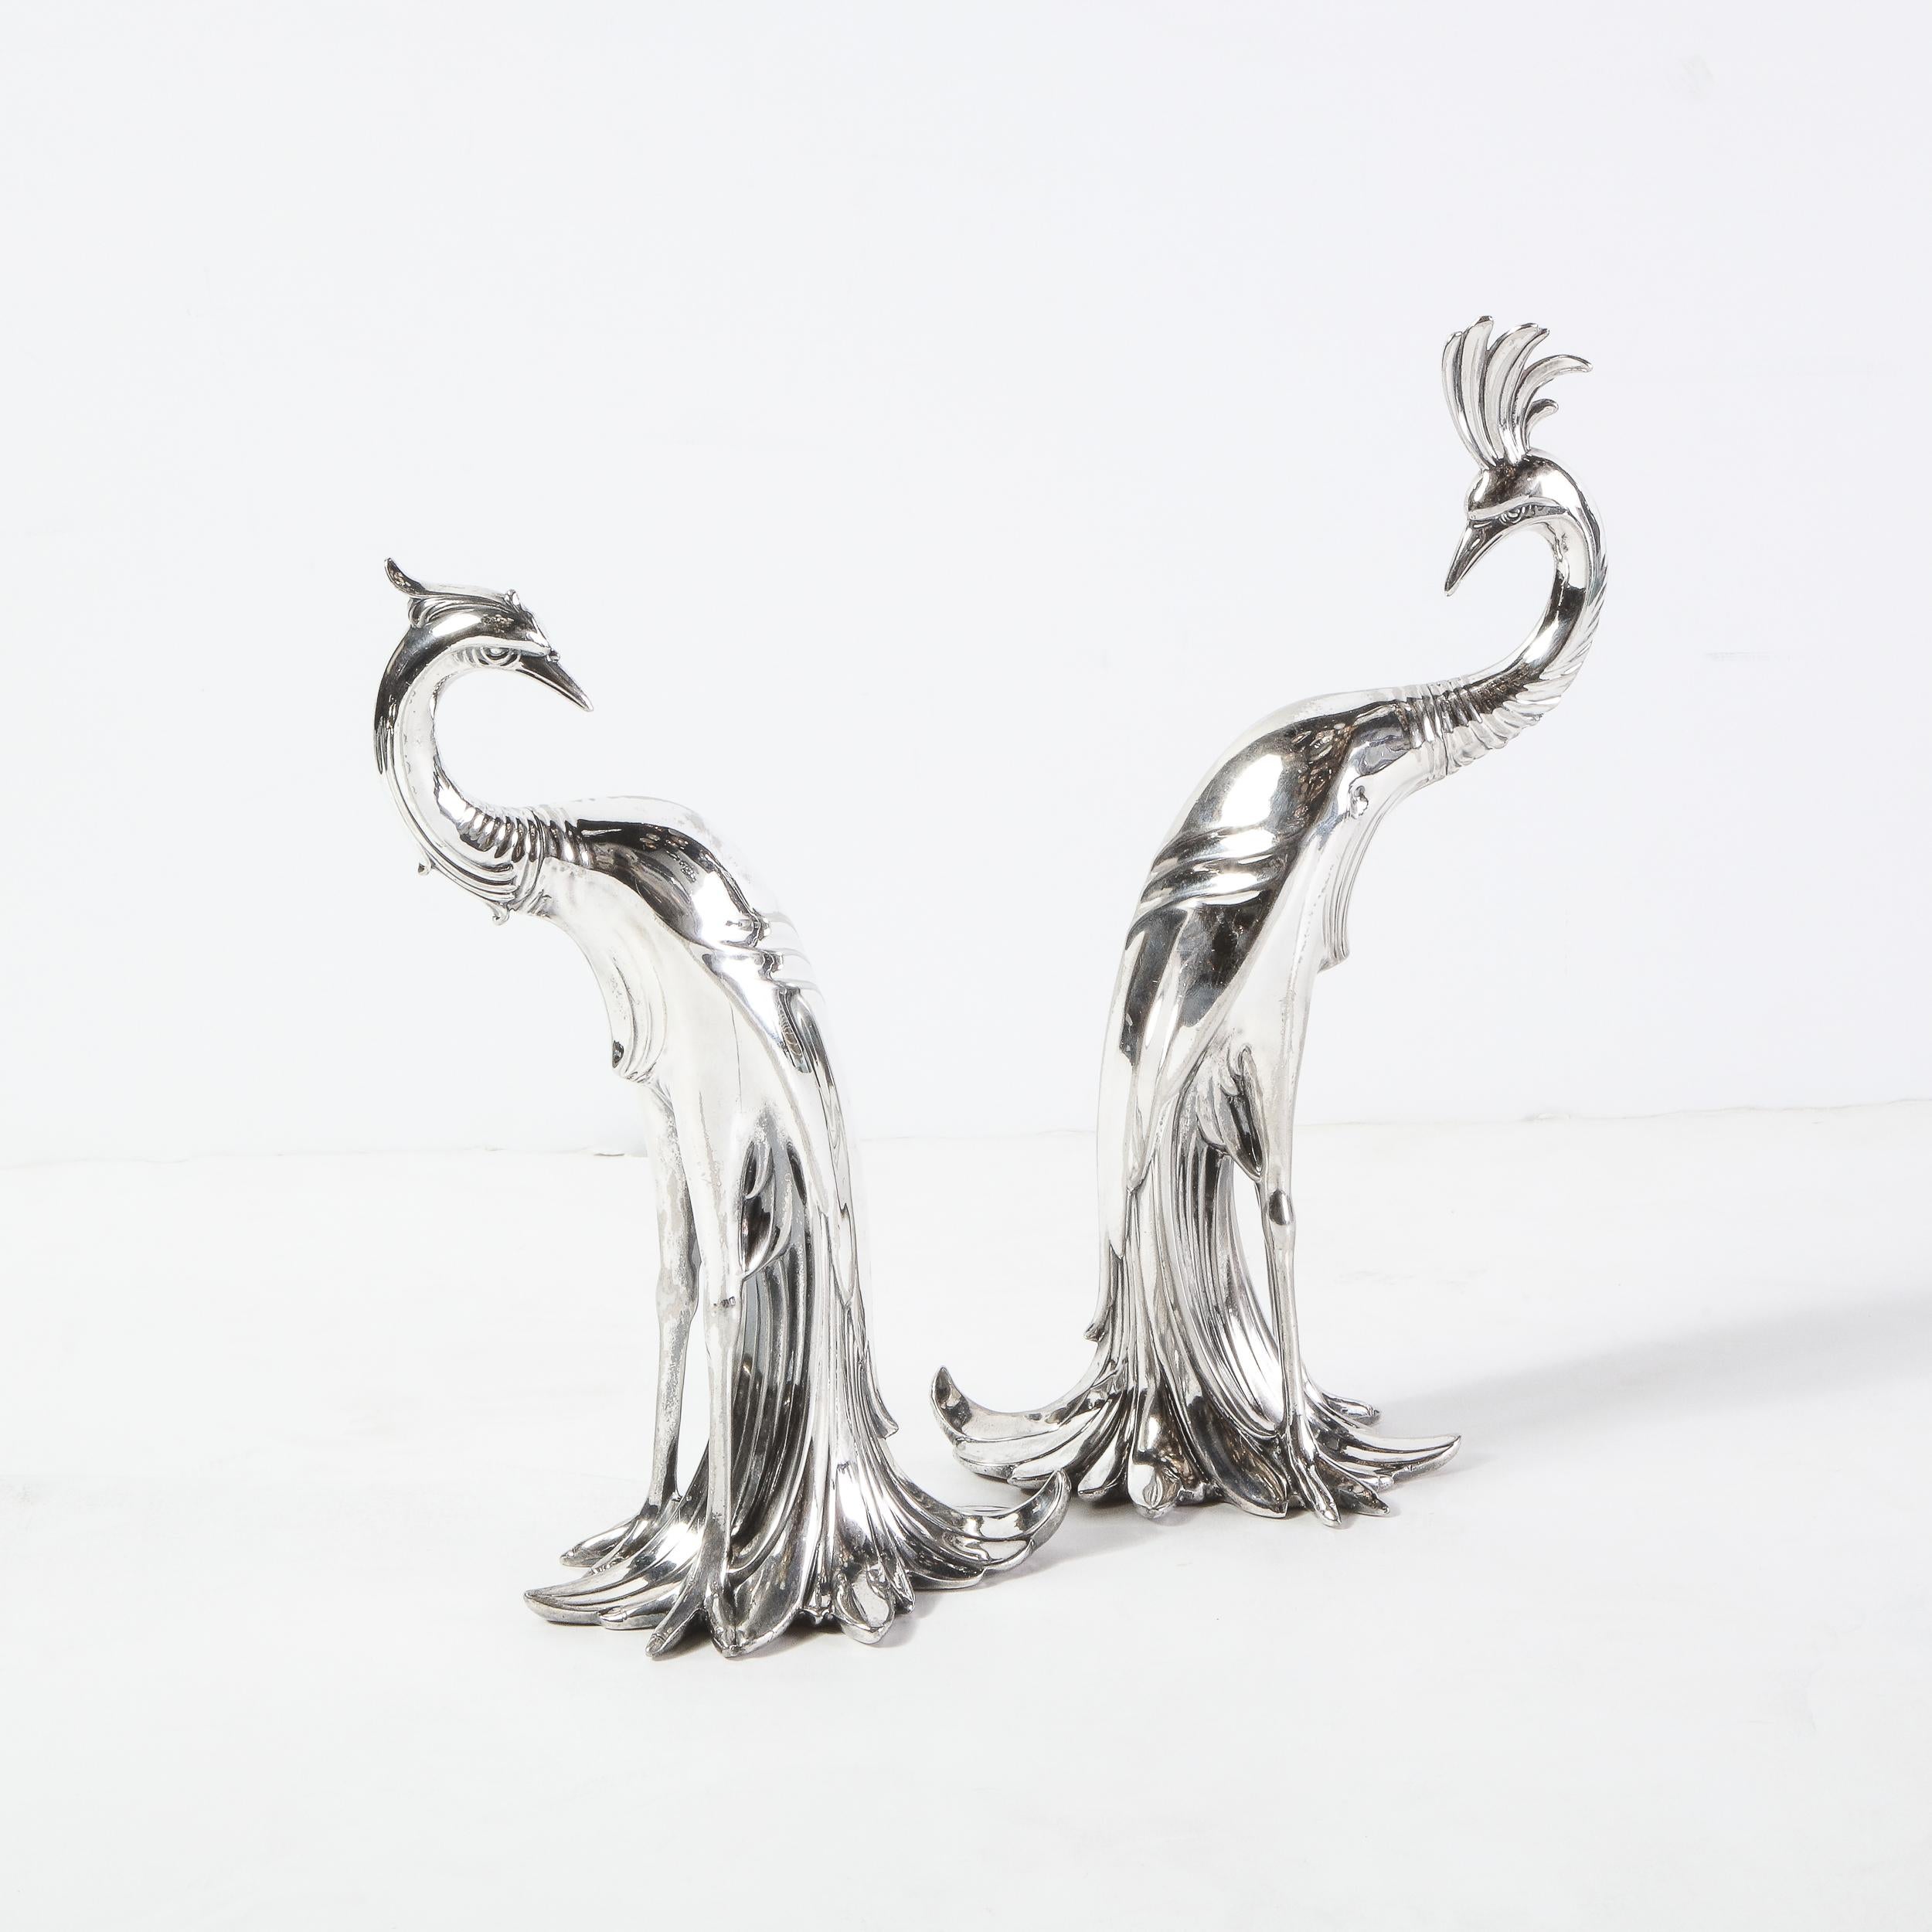 Polished Pair of 1930s Art Deco Silverplated Stylized Peacock Sculptures by Weidlich Bros